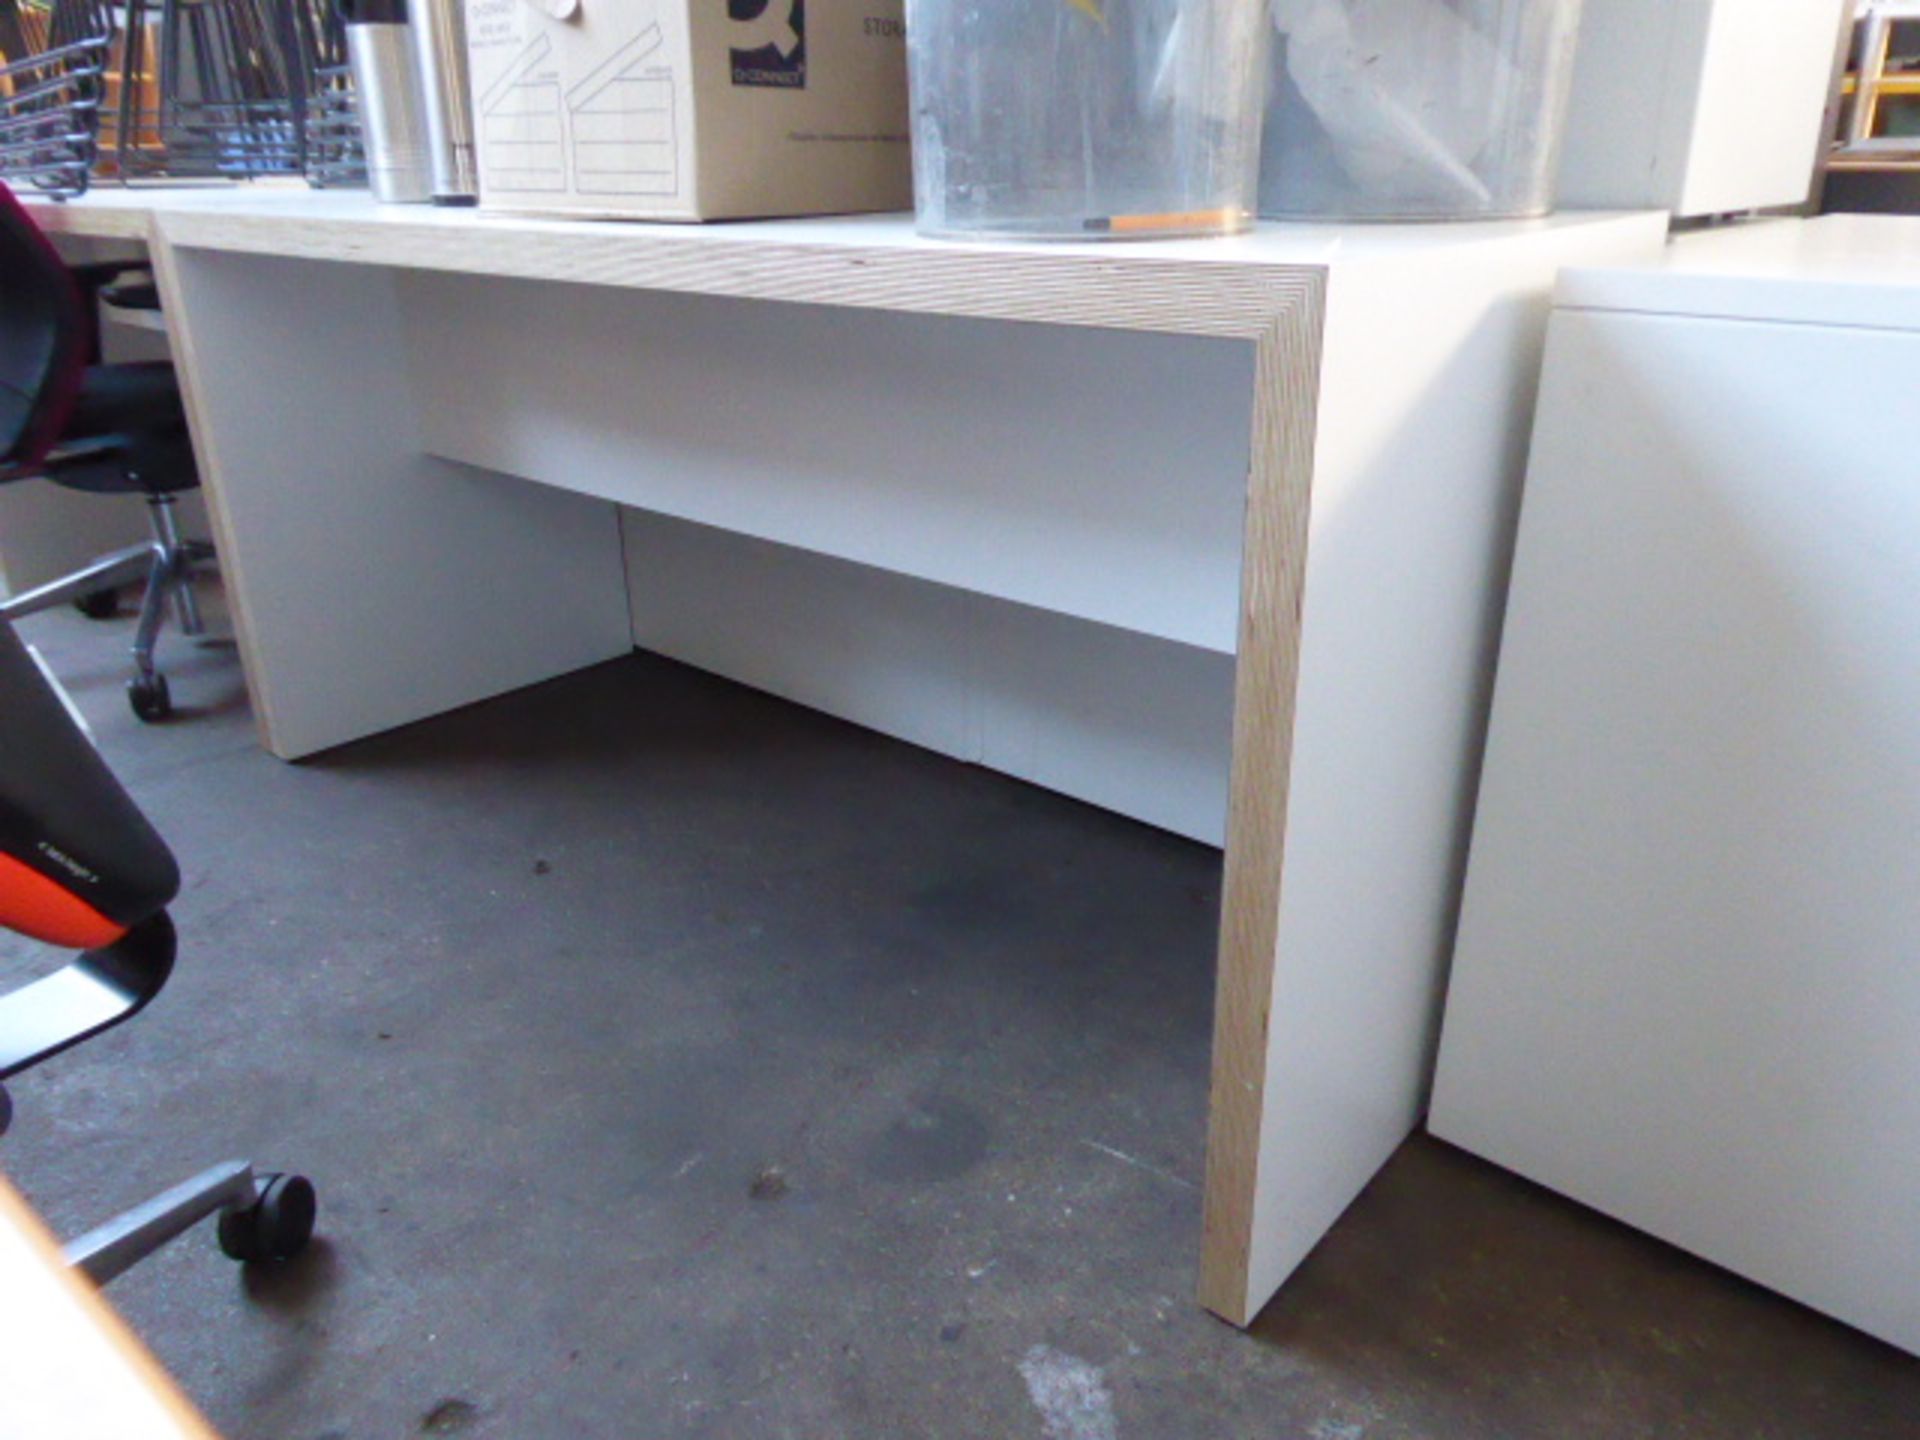 160cm white bench type workstation, with a wood detail edge - Image 2 of 2